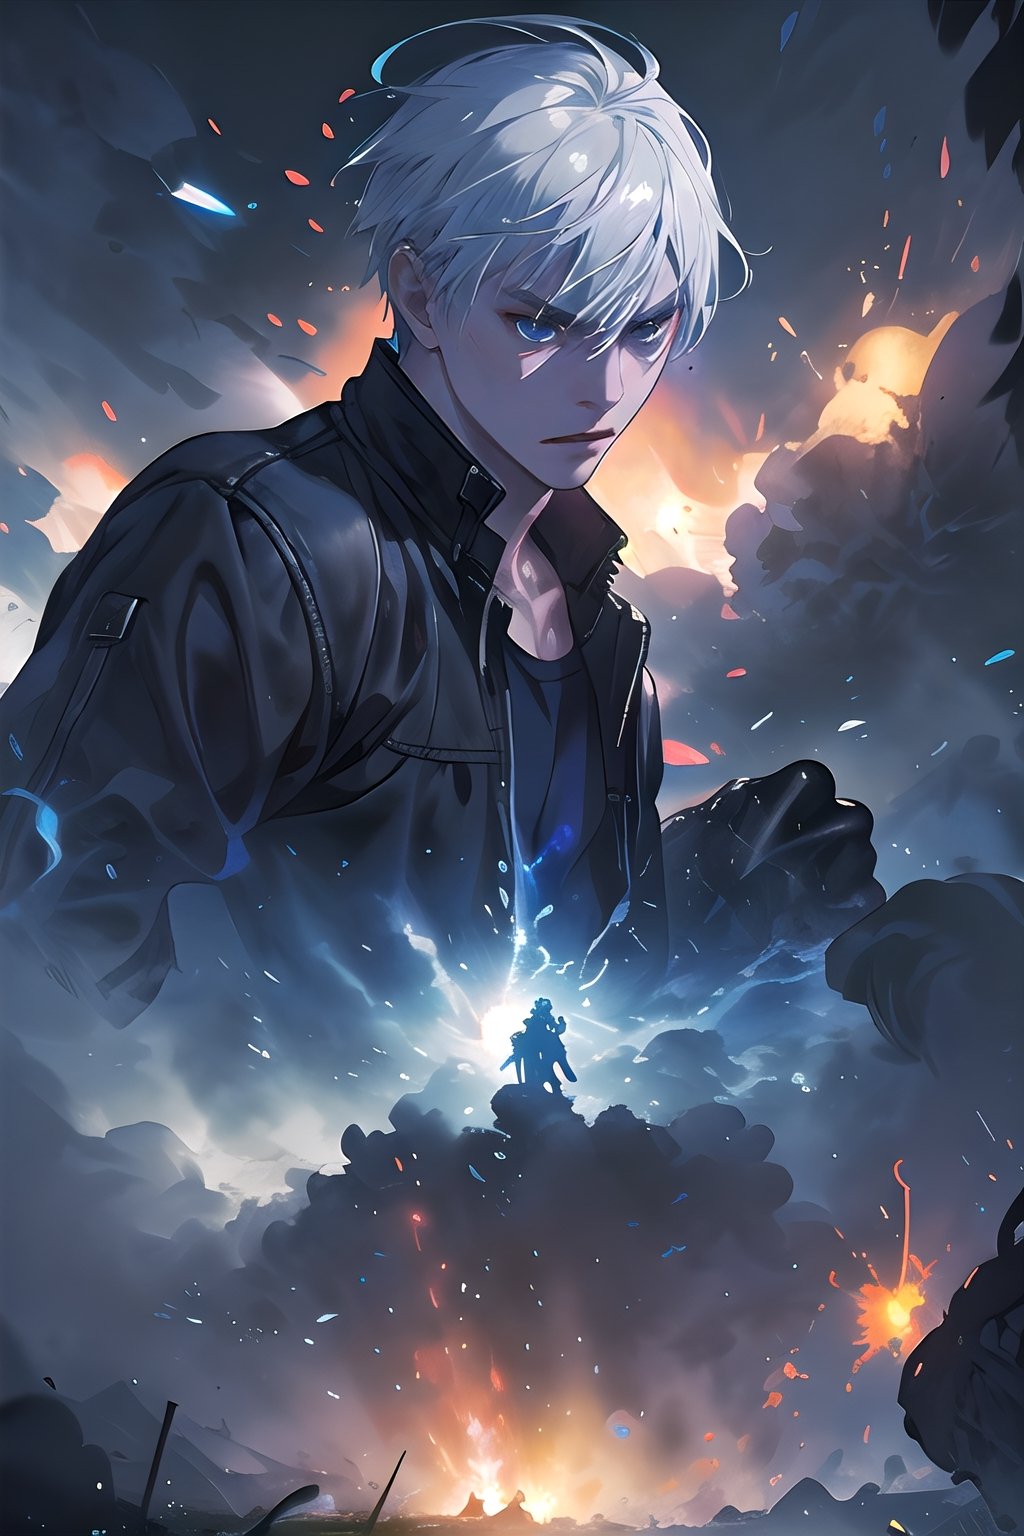 "Craft a highly detailed and emotionally charged depiction of Gojo Satoru in an epic fight, white short hair, with his intense blue eyes and white hair accentuated against a backdrop of roaring flames, drawing inspiration from the captivating style of Makoto Shinkai."